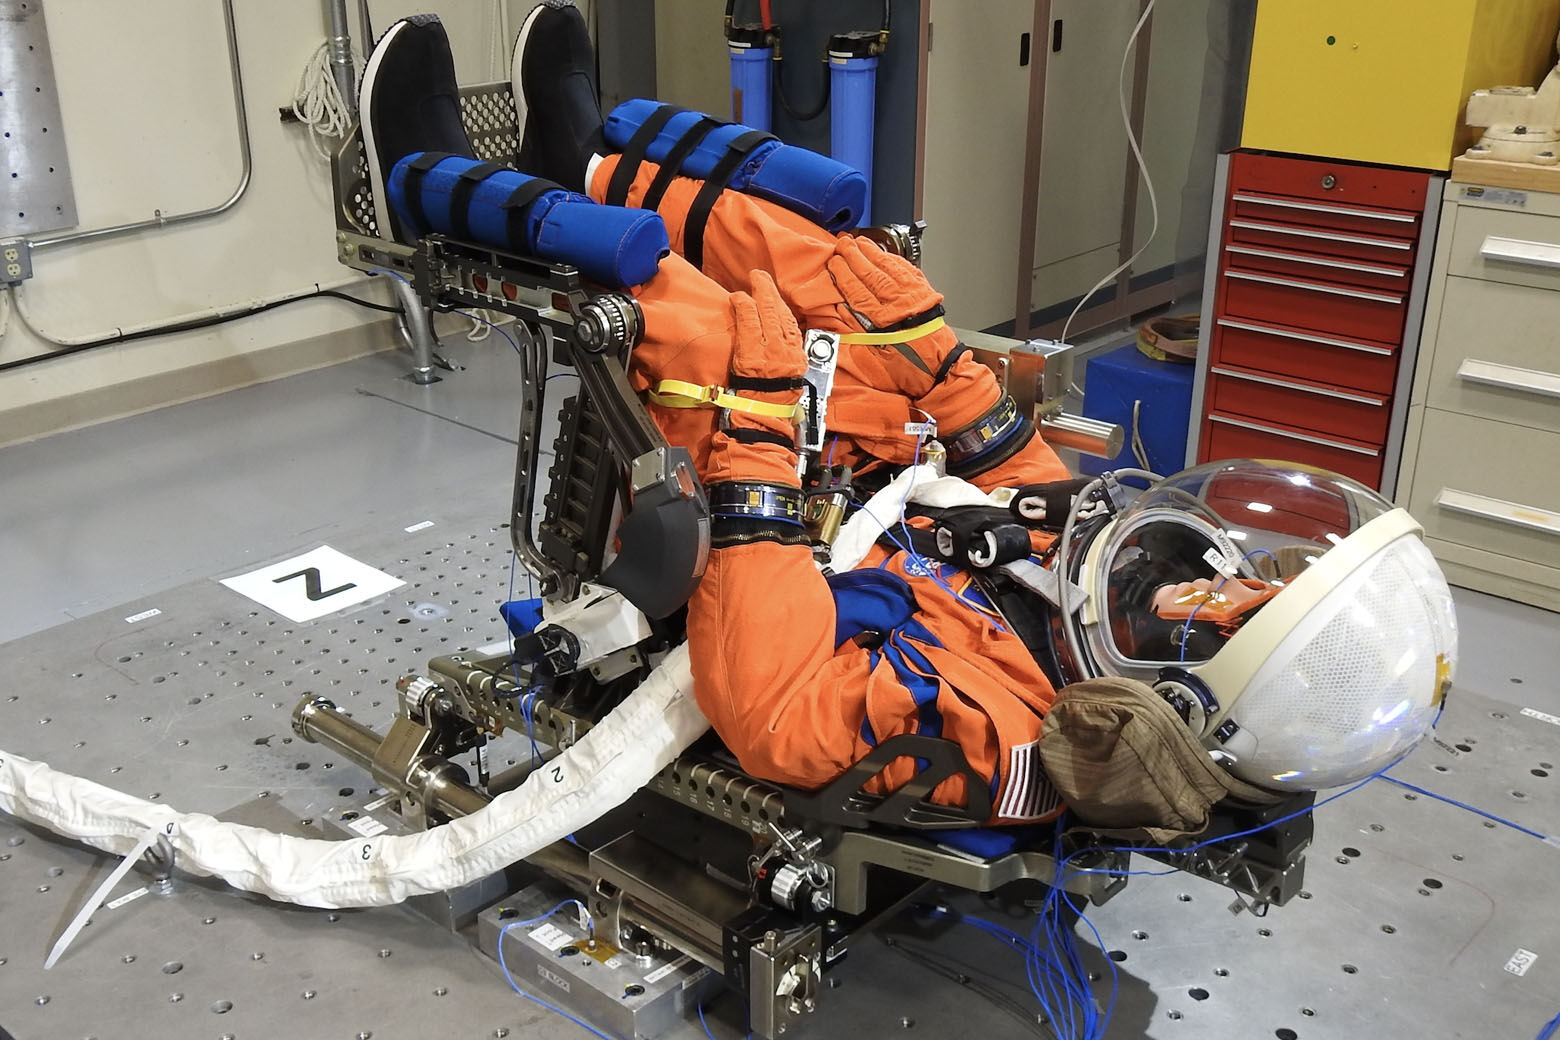 The Artemis I "moonikin" outfitted with sensors to provide data on what crew members may experience in flight. (Courtesy NASA)